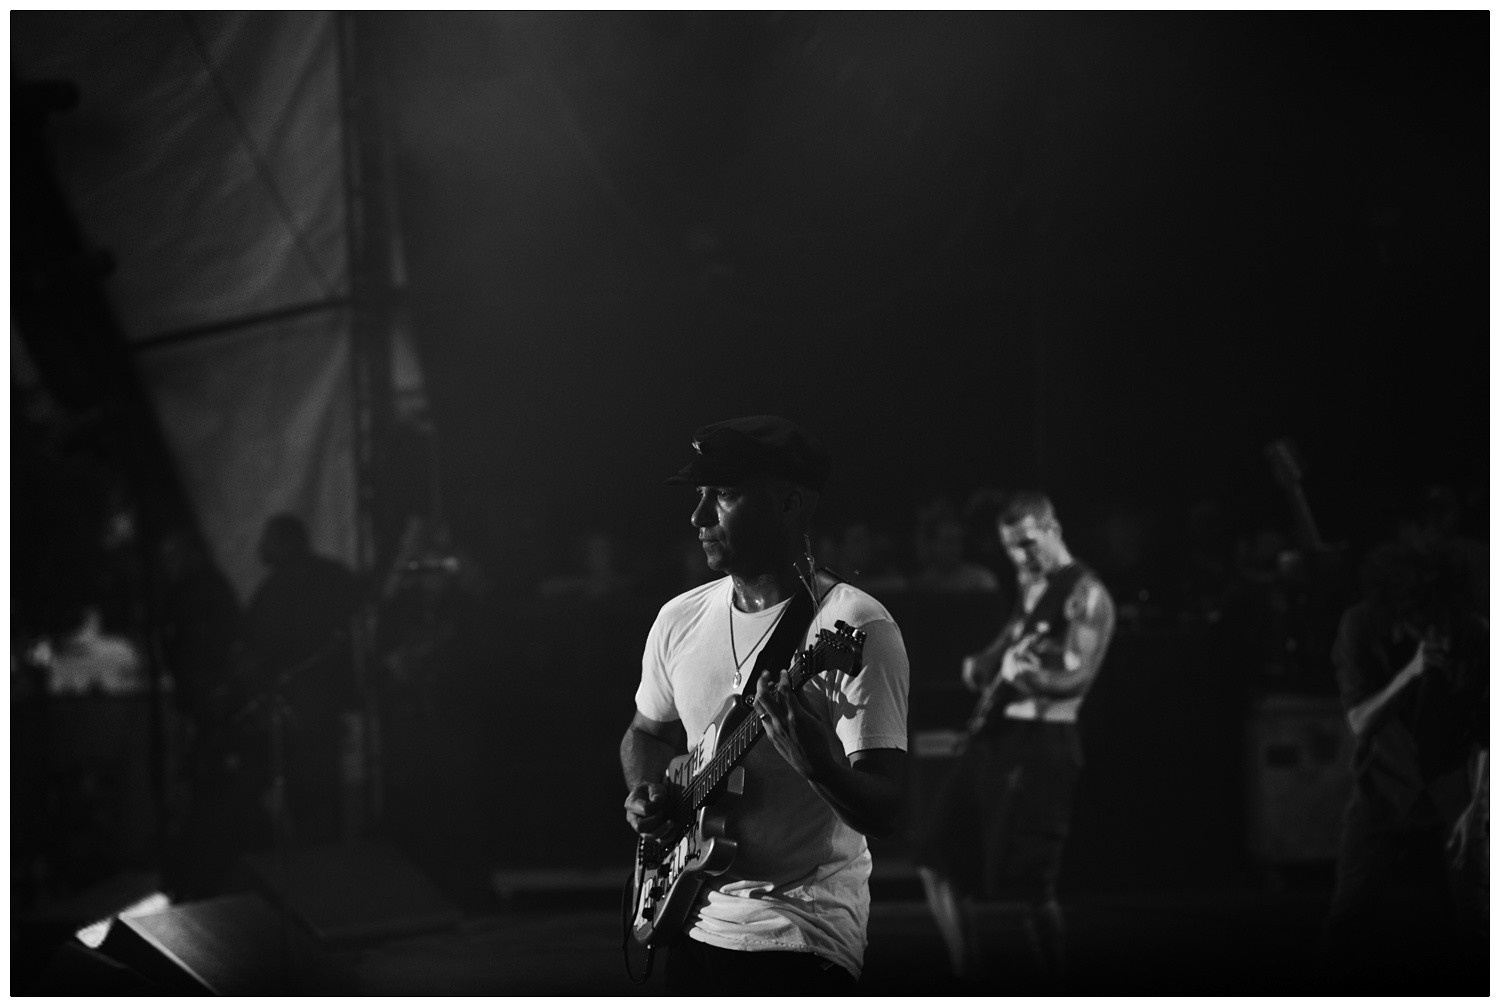 Tom Morello playing the Arm the Homeless guitar at the Finsbury Park gig, Timmy C in the background on bass